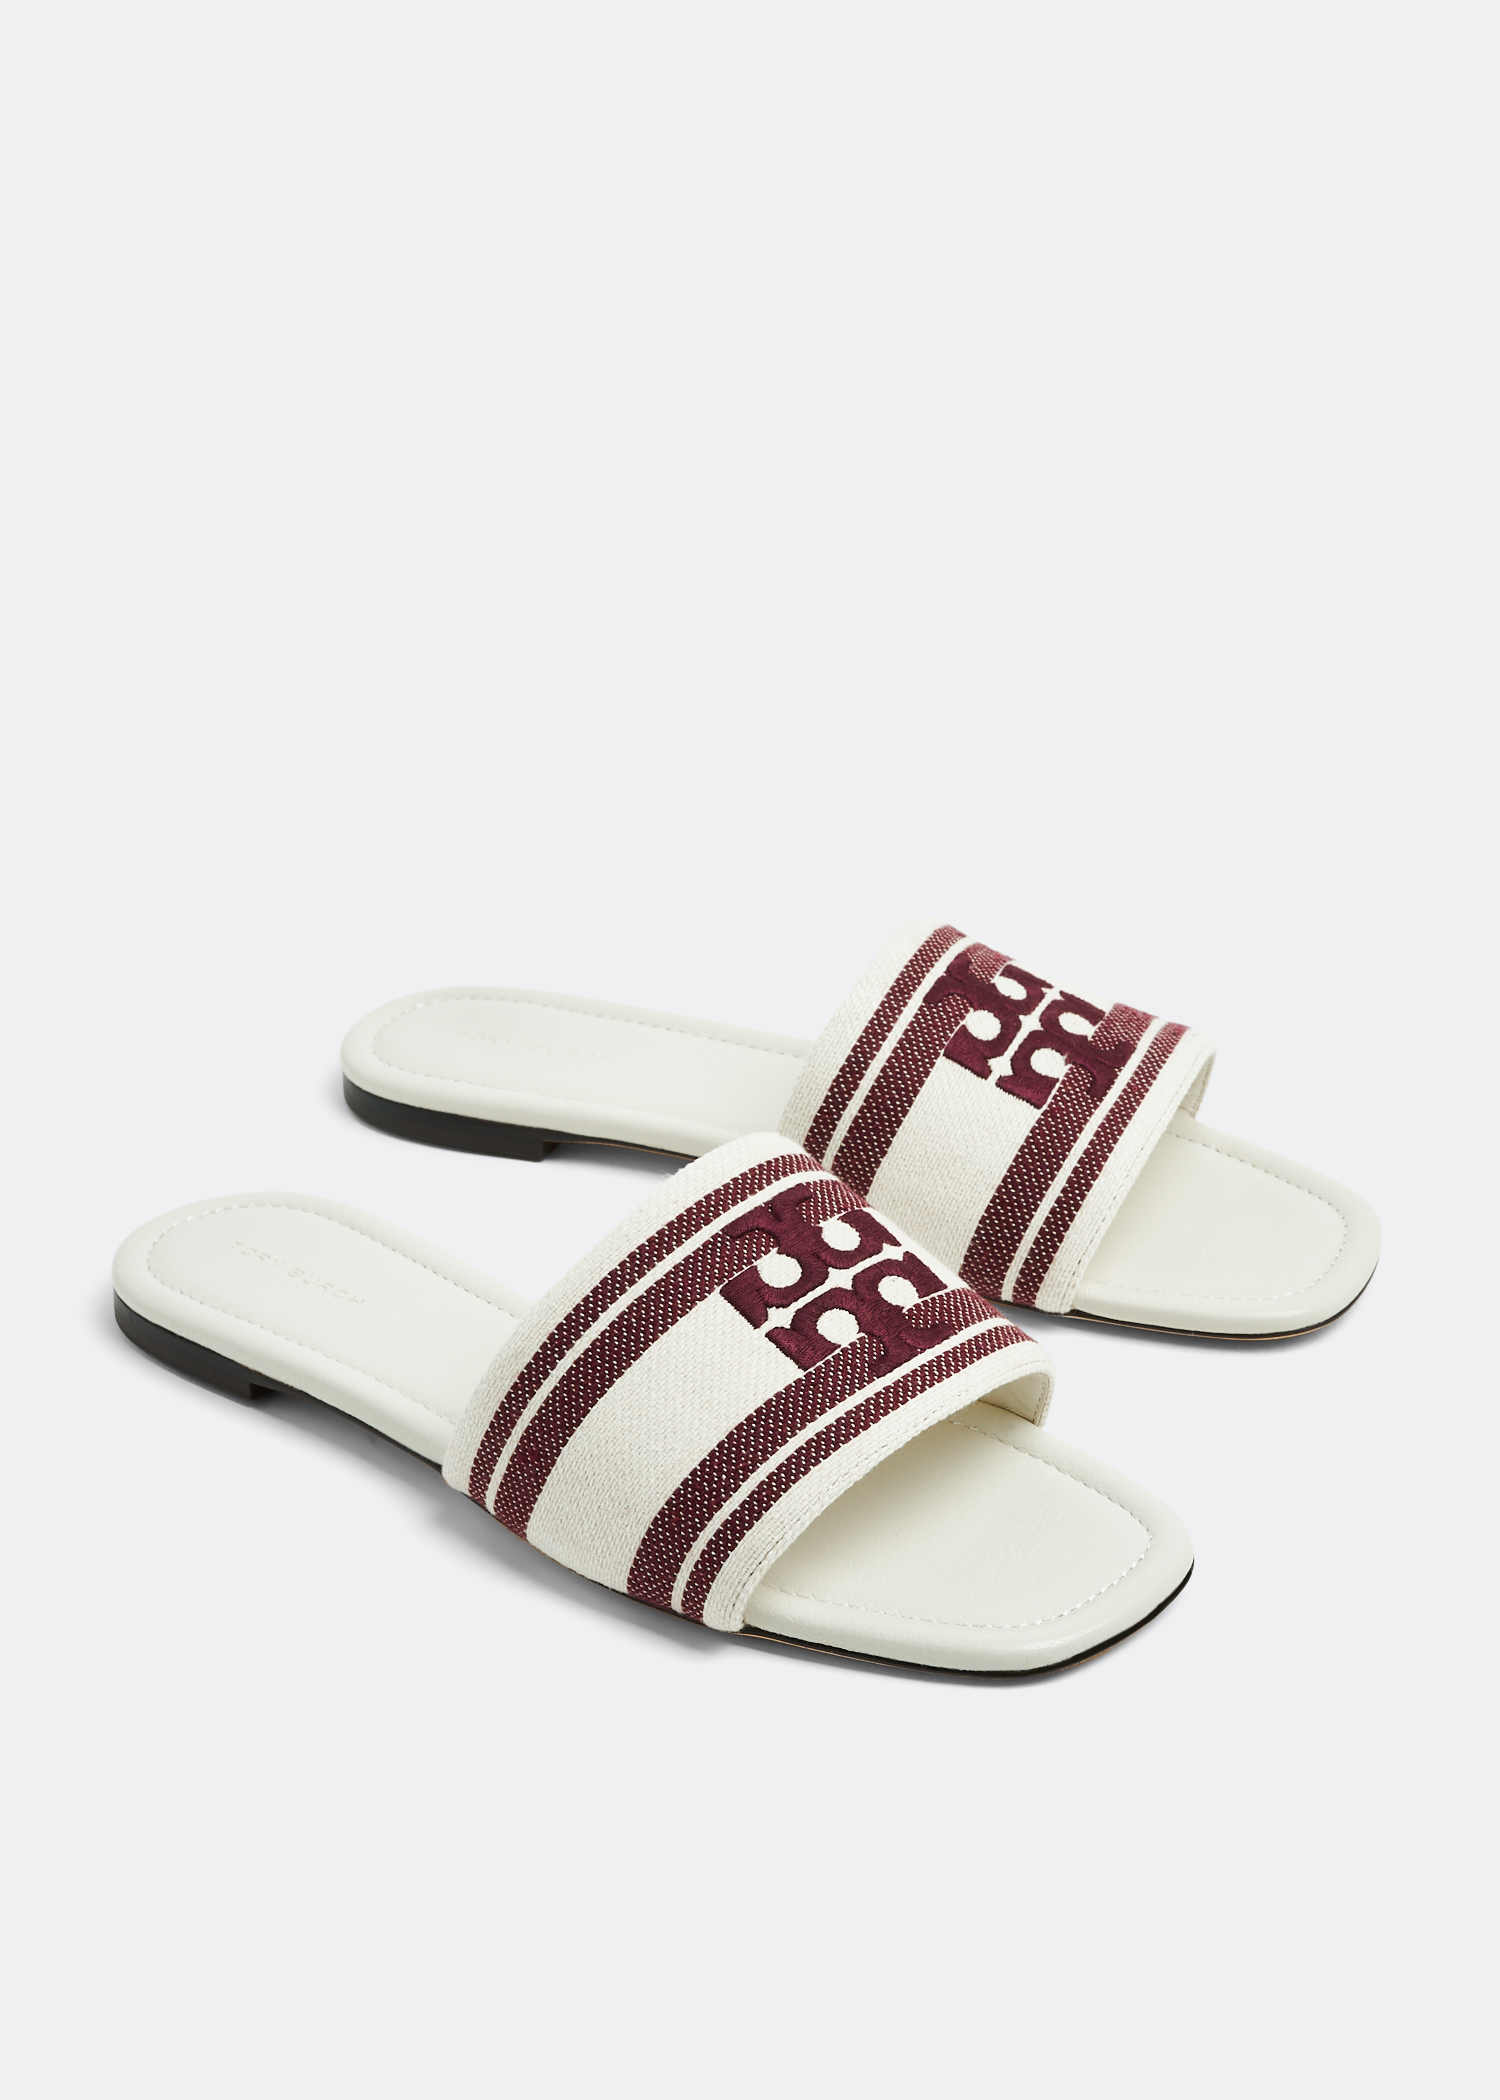 Tory Burch Double T slides for Women - White in Bahrain | Level Shoes